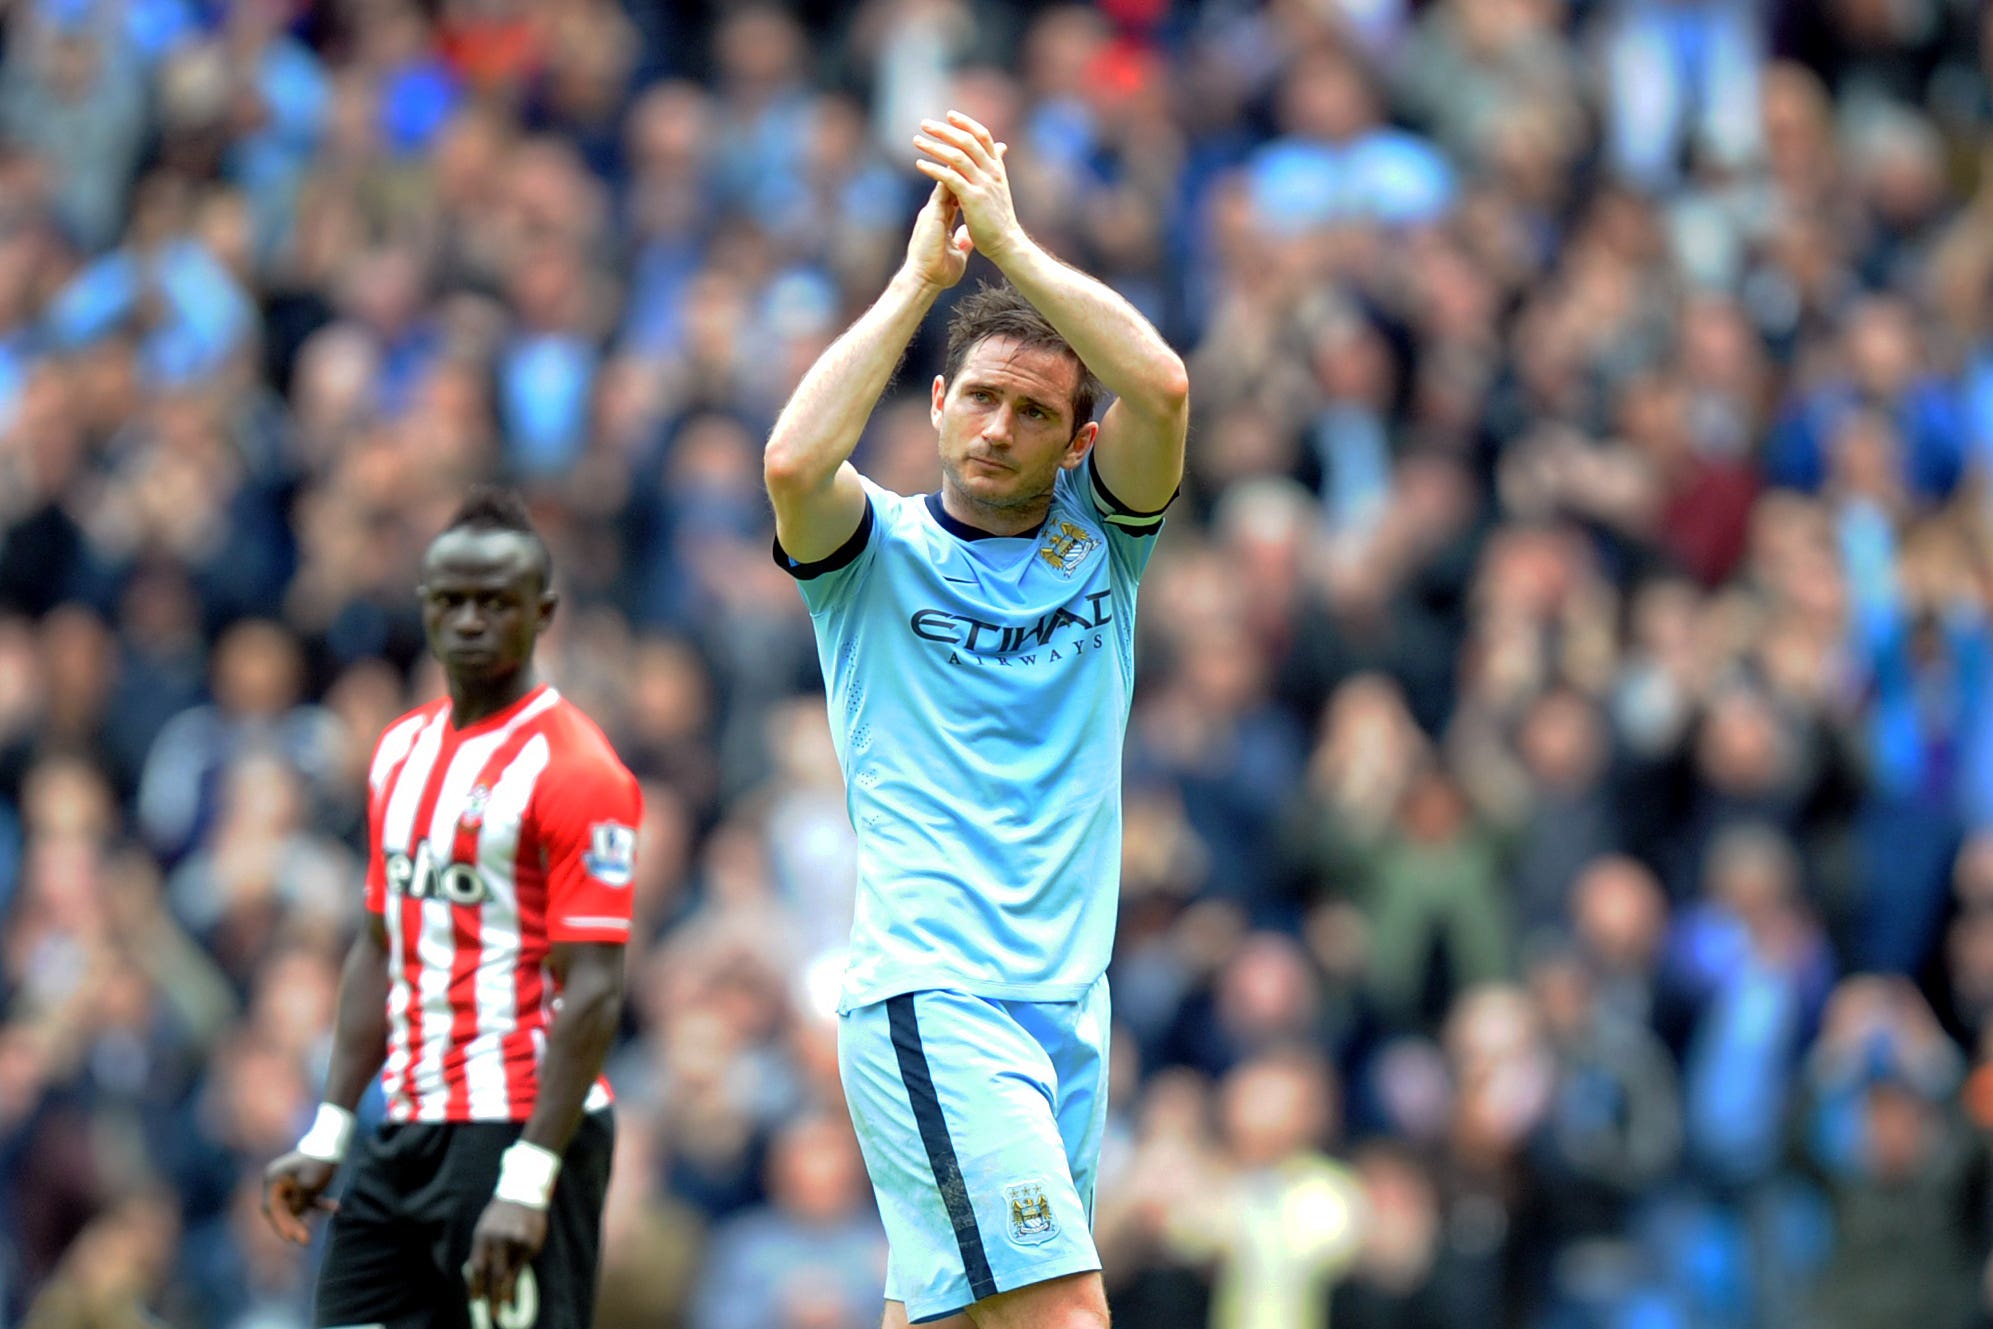 Frank Lampard says playing at Manchester City opened his eyes to a different way of running a club